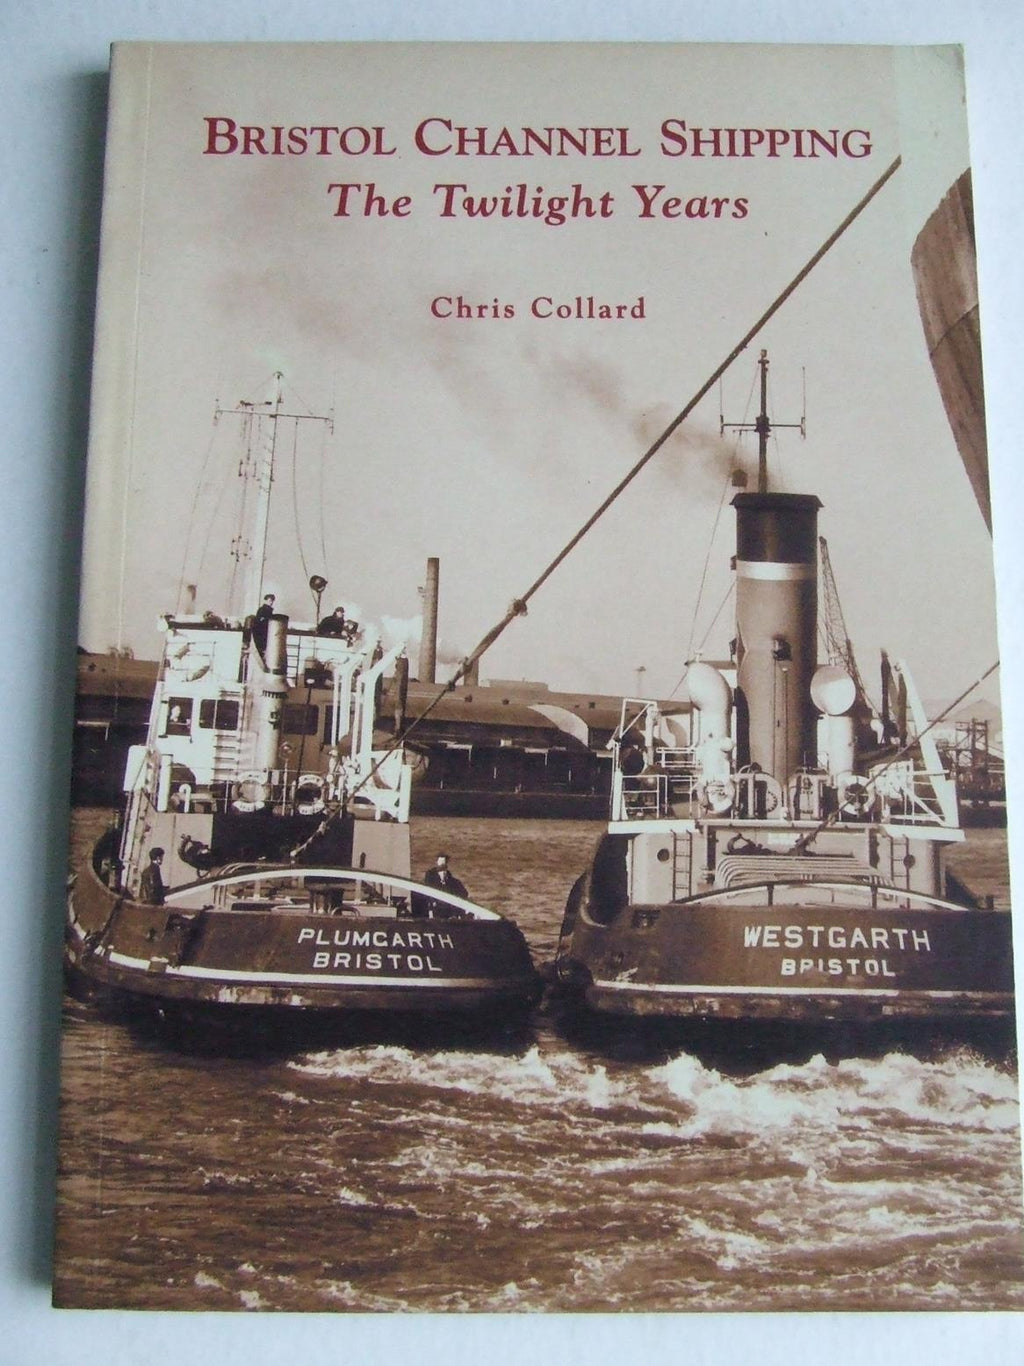 Bristol Channel Shipping, the twilight years